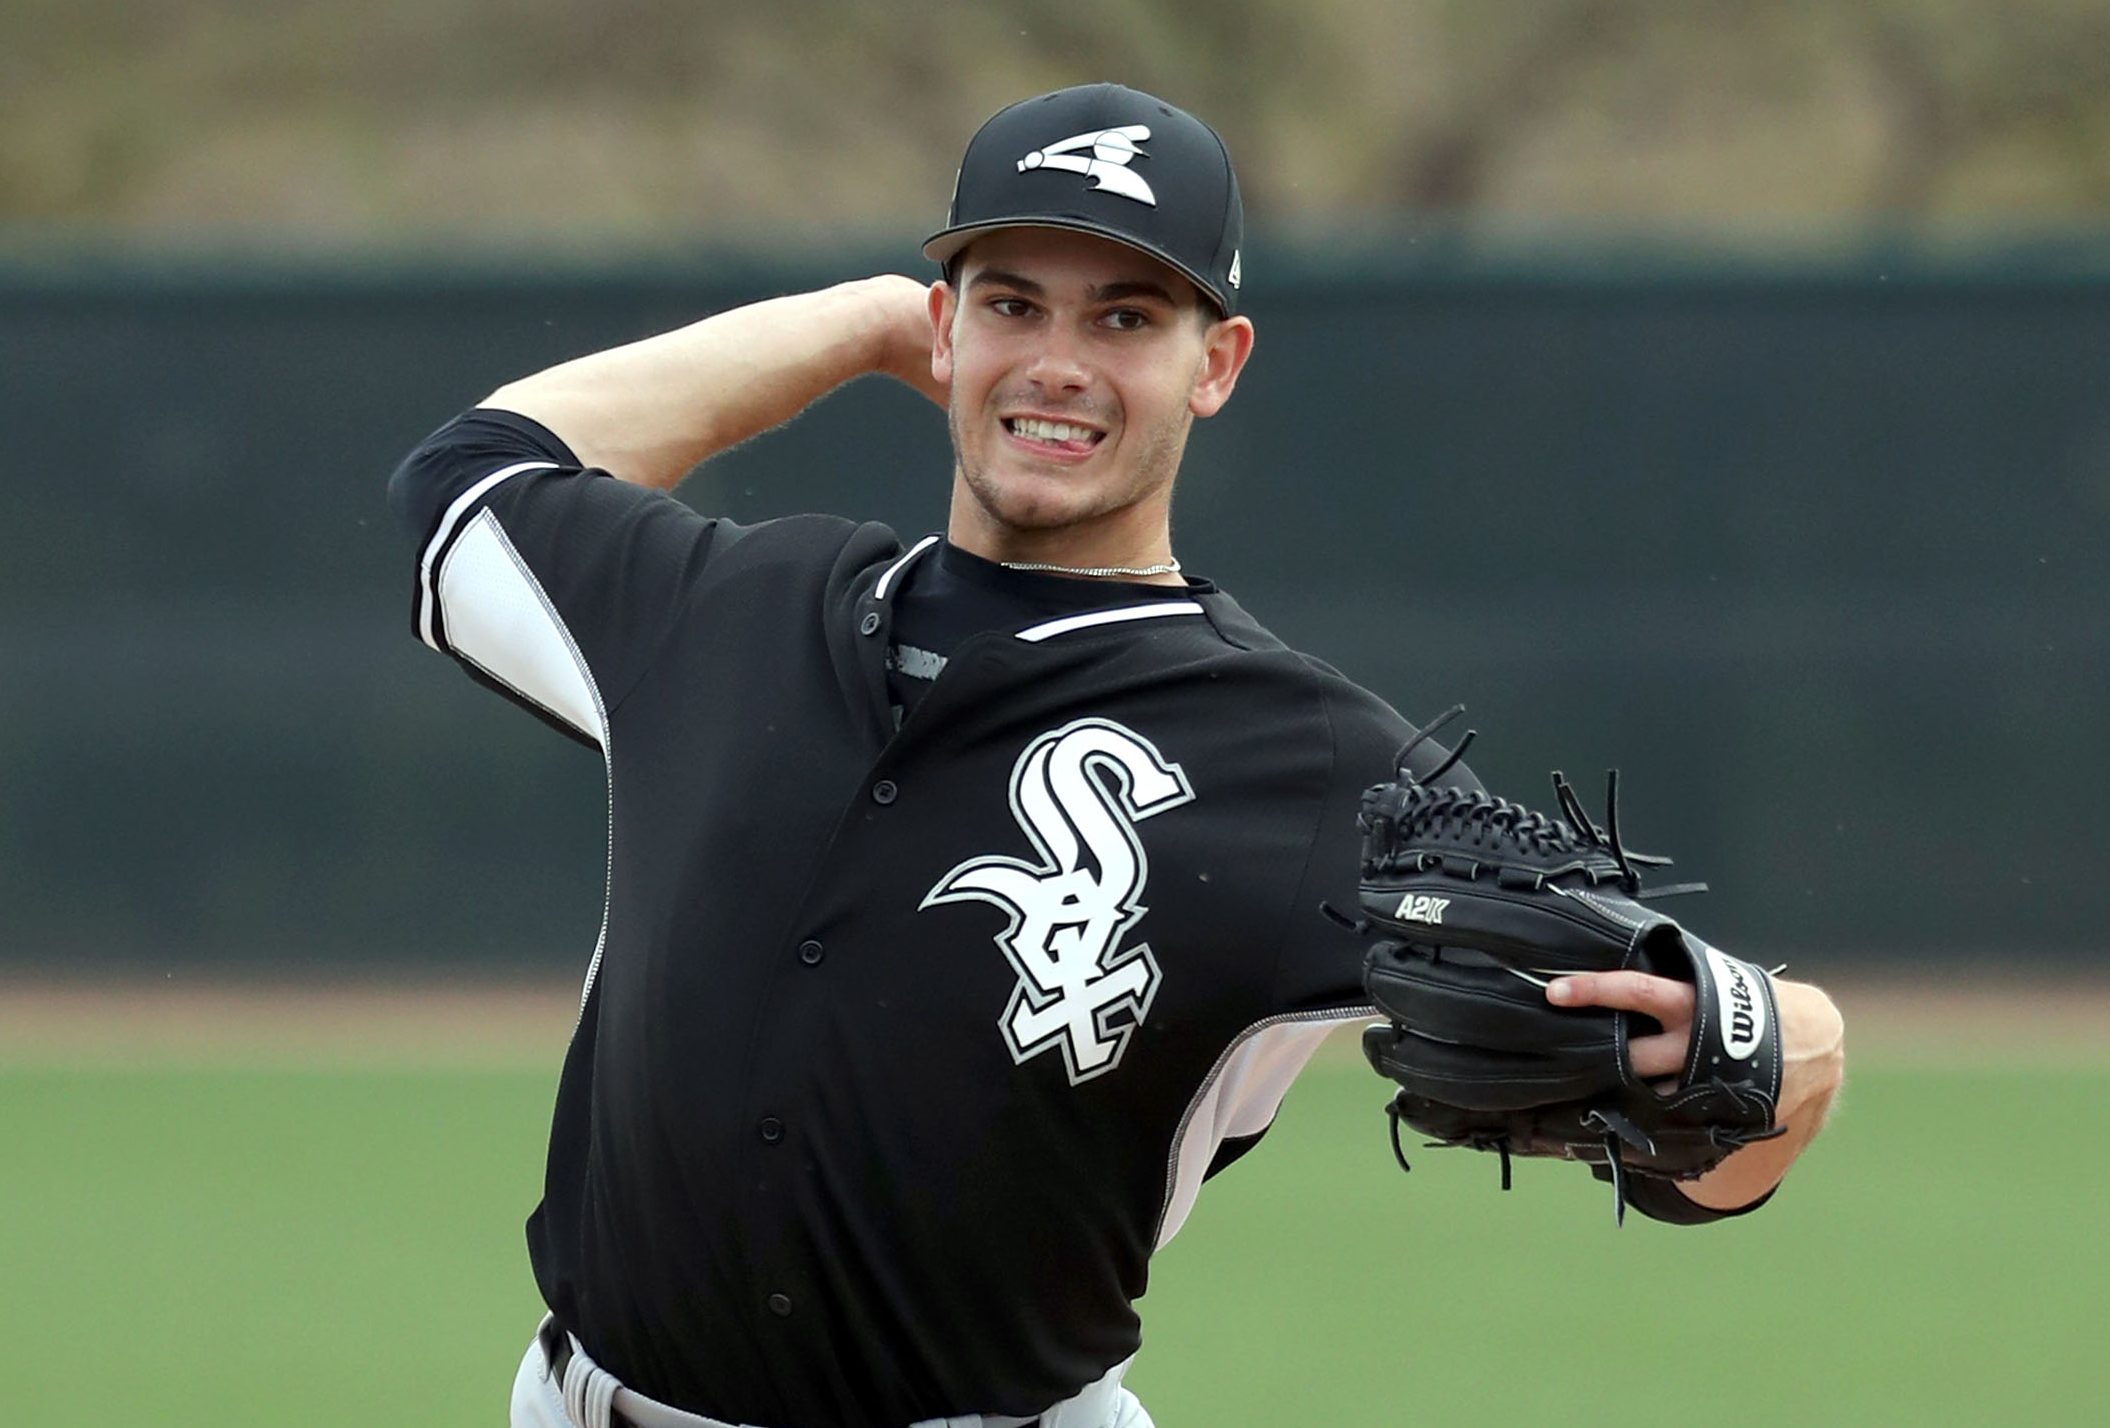 Weekly Prospect Spotlights: Dylan Cease and Padres Southpaws - 2080 Baseball